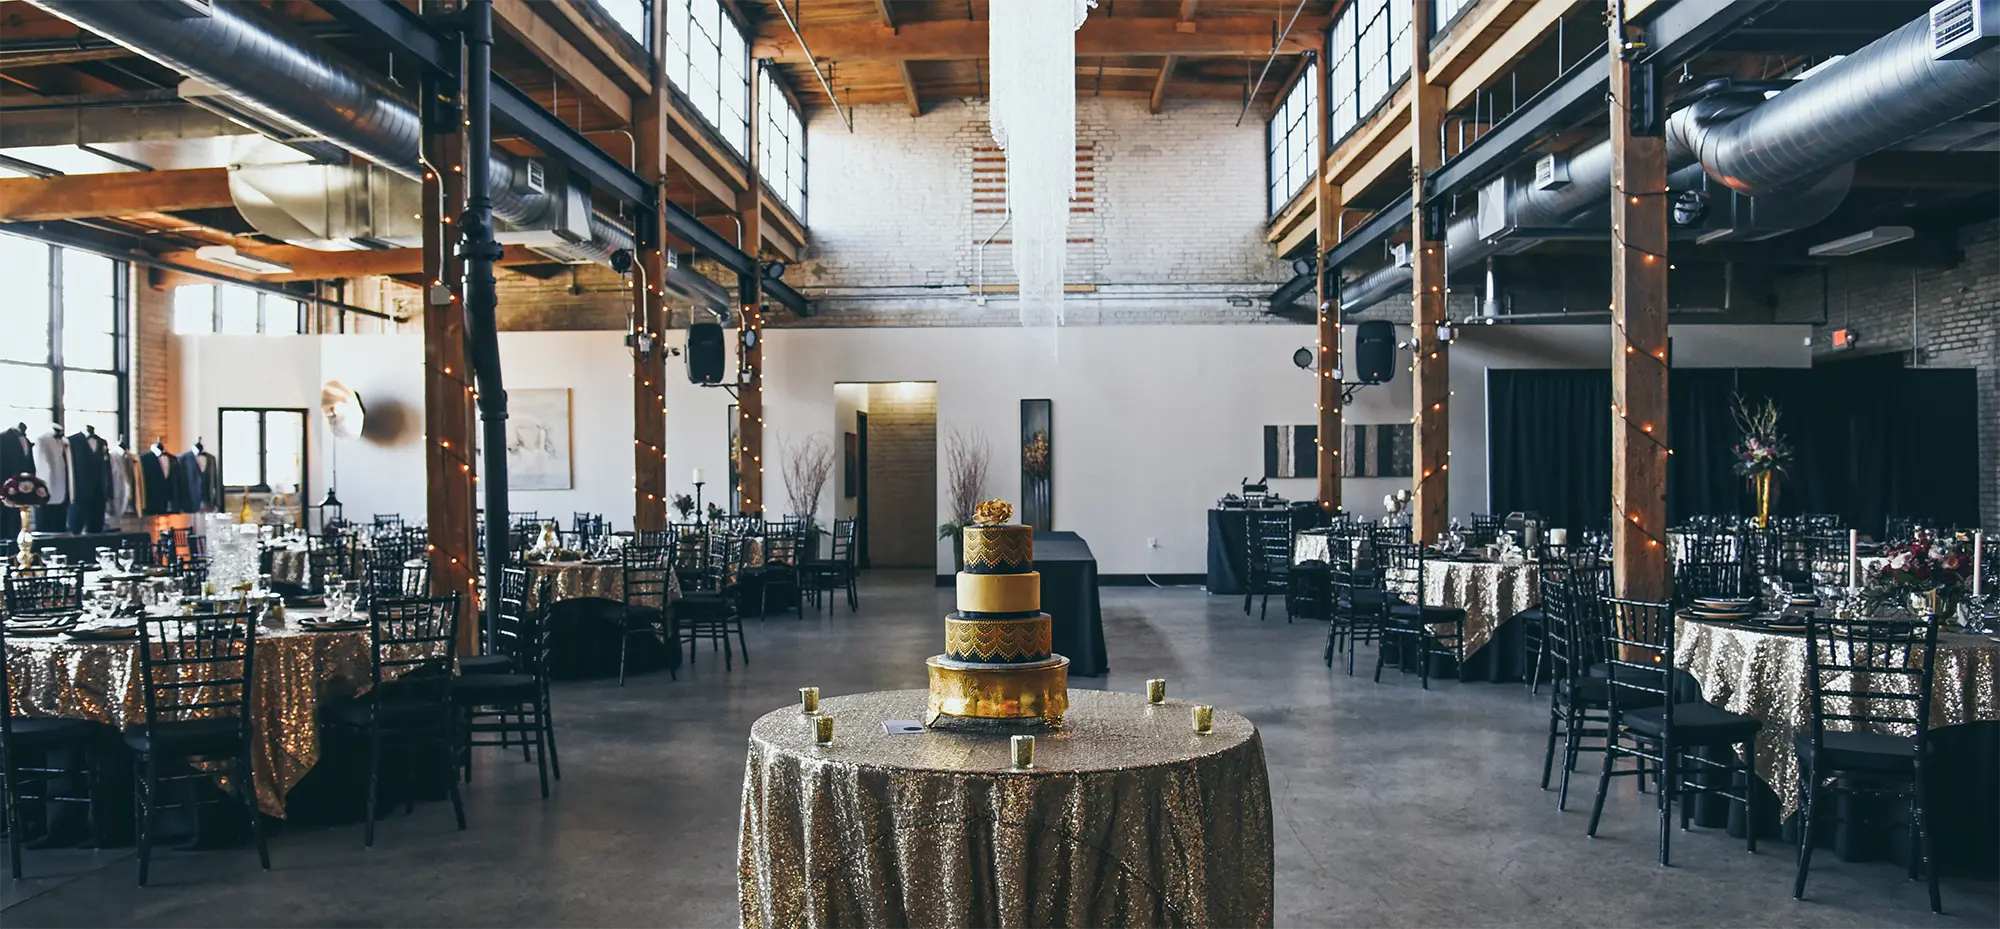 Interior landscape photograph of a large room area showing many tables and black chairs with gold colored glitter table covers over the tables and one of the tables in the front middle has a gold colored decorated four layer cake at the Studio D2D Event Space venue